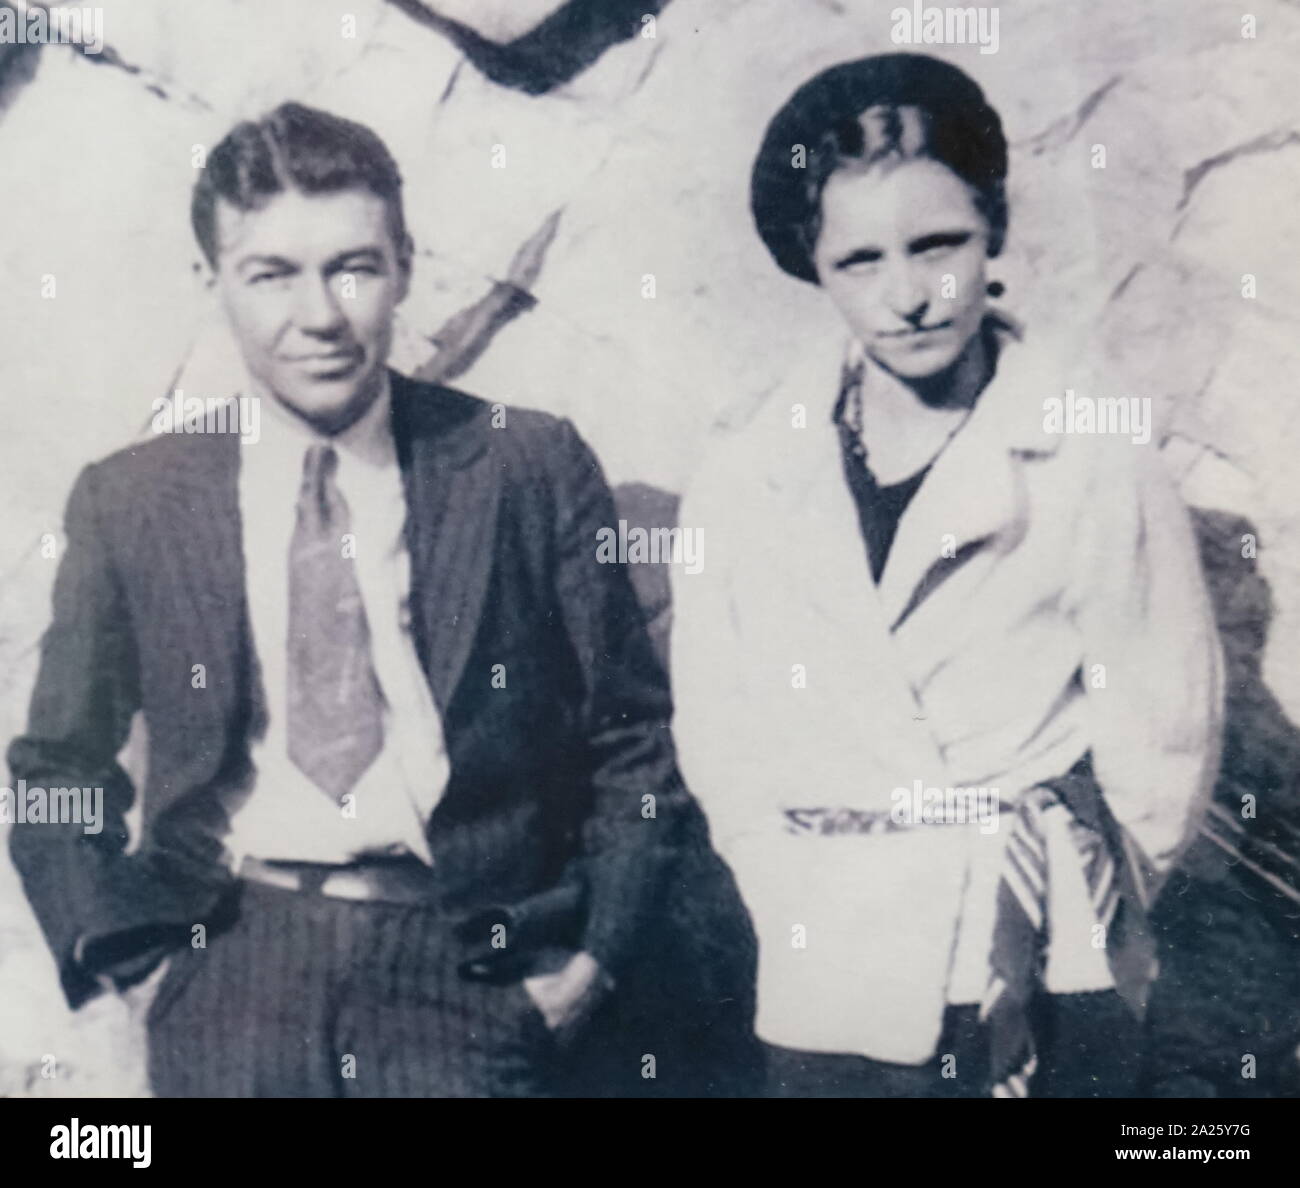 A photograph of Bonnie and Clyde. Bonnie Elizabeth Parker (1910-1934) and Clyde Chestnut Barrow (1909-1934) American criminals who travelled around the Central United States with their gang during the Great Depression. Stock Photo